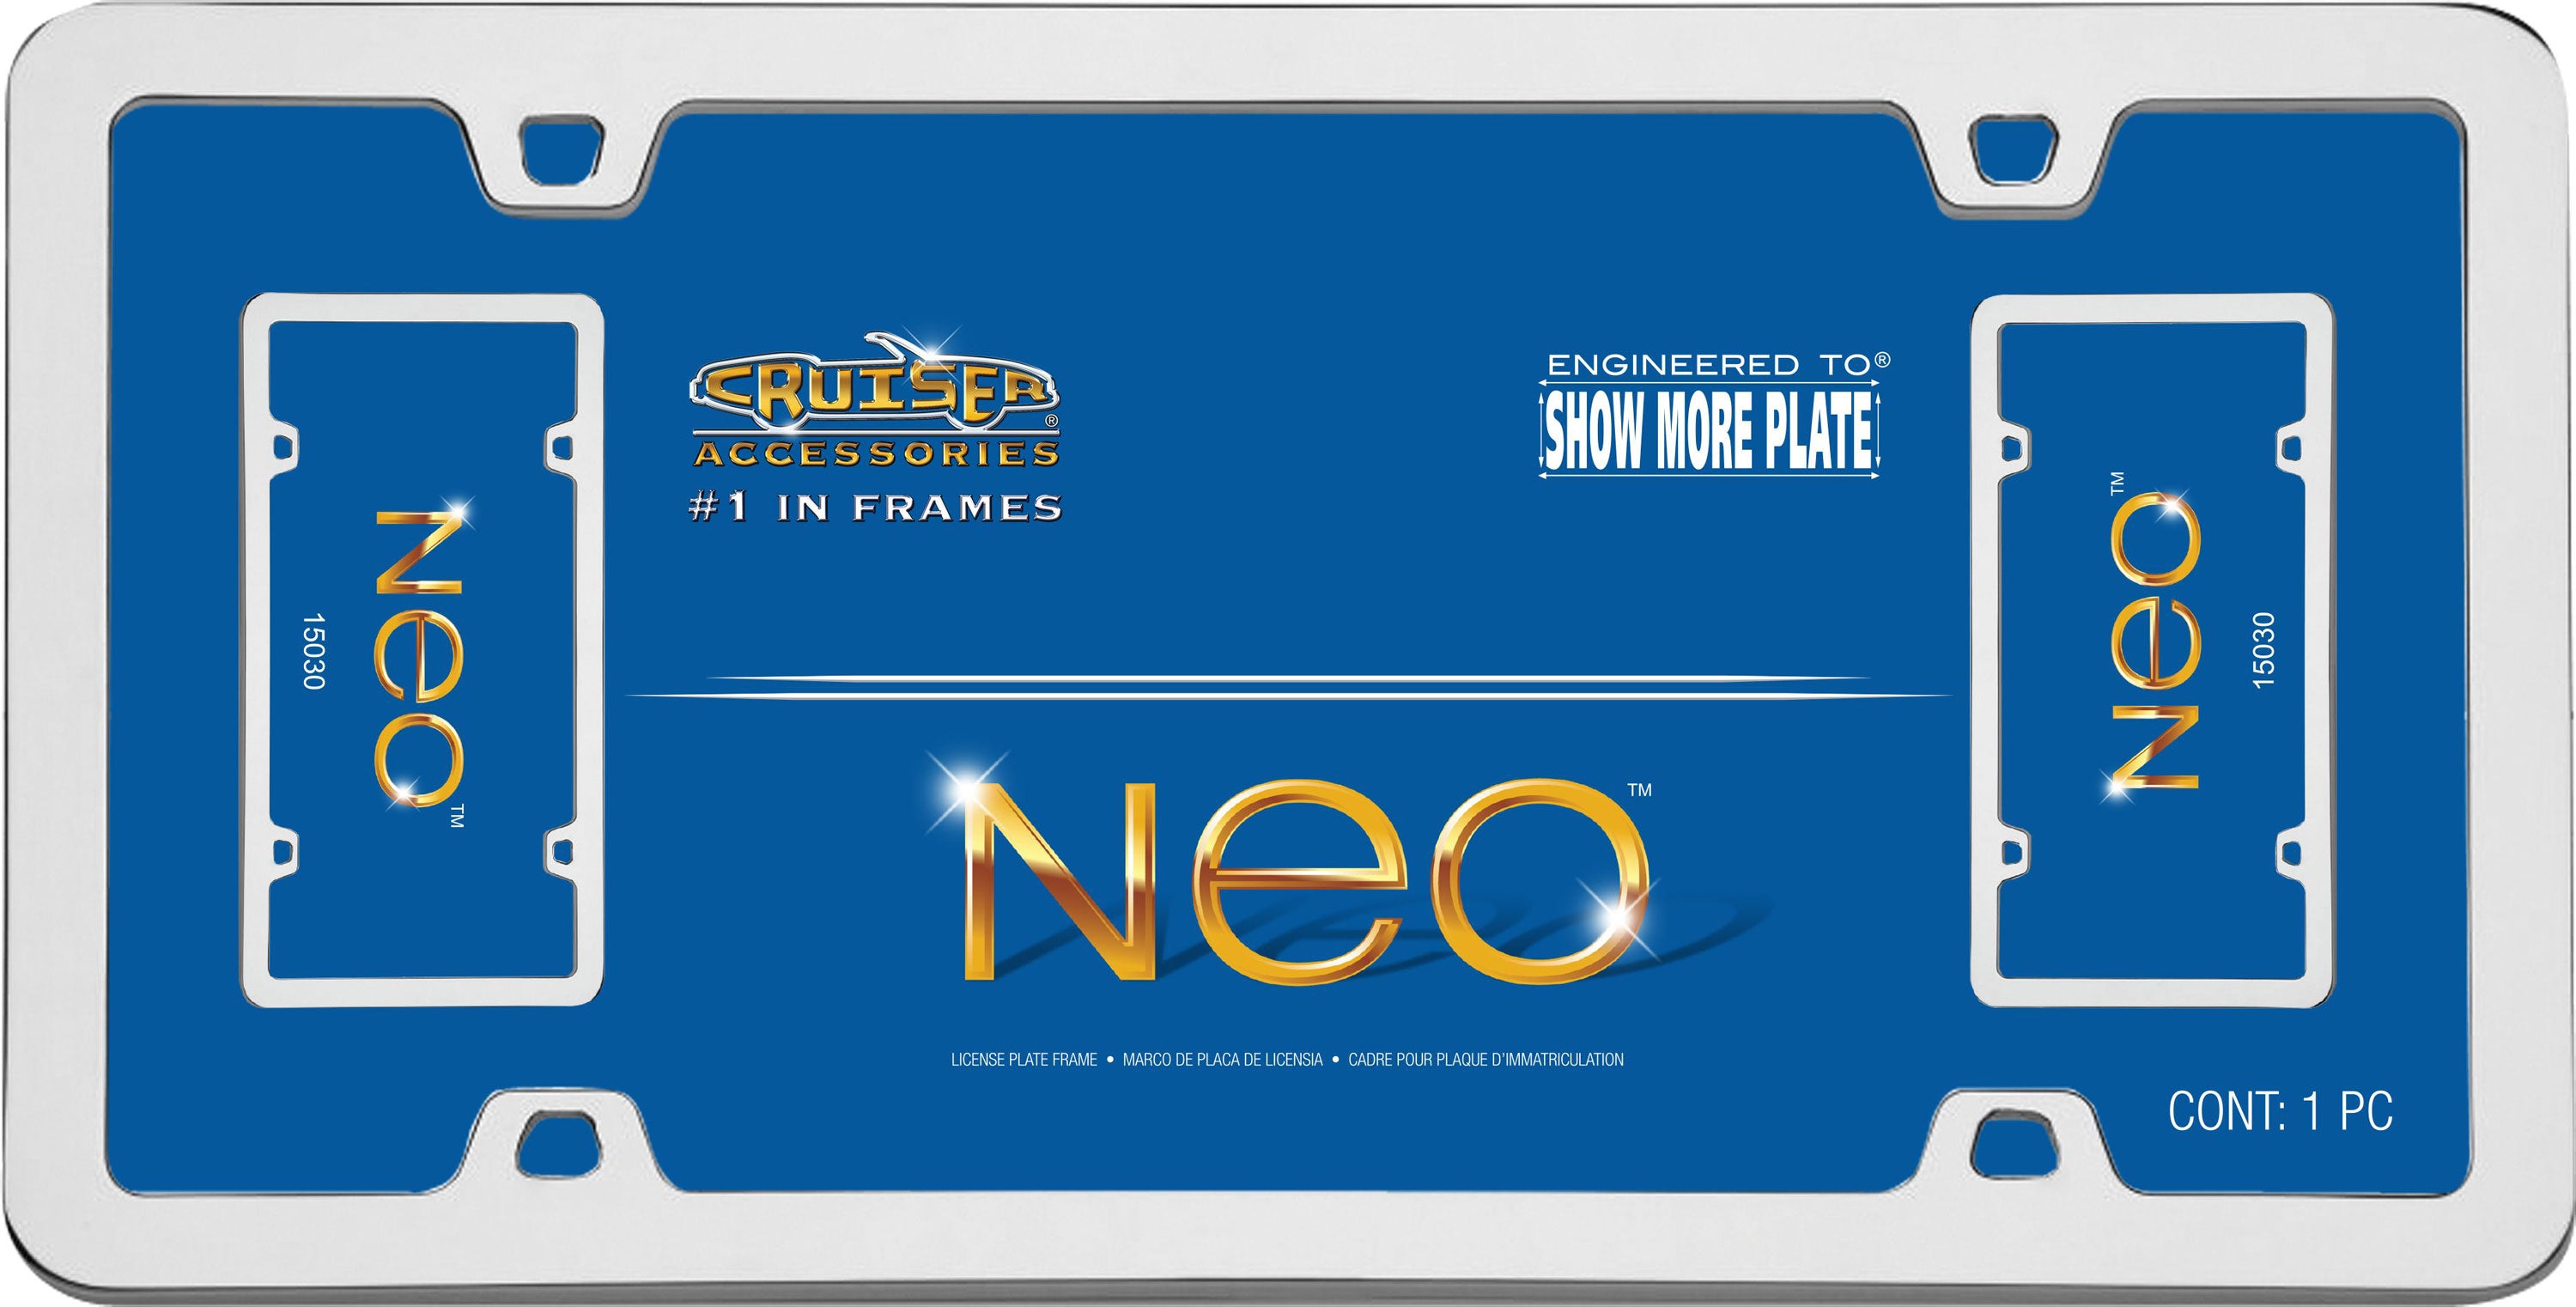 Cruiser Accessories 15030 License Plate Frame - Neo, Chrome-Plated Metal